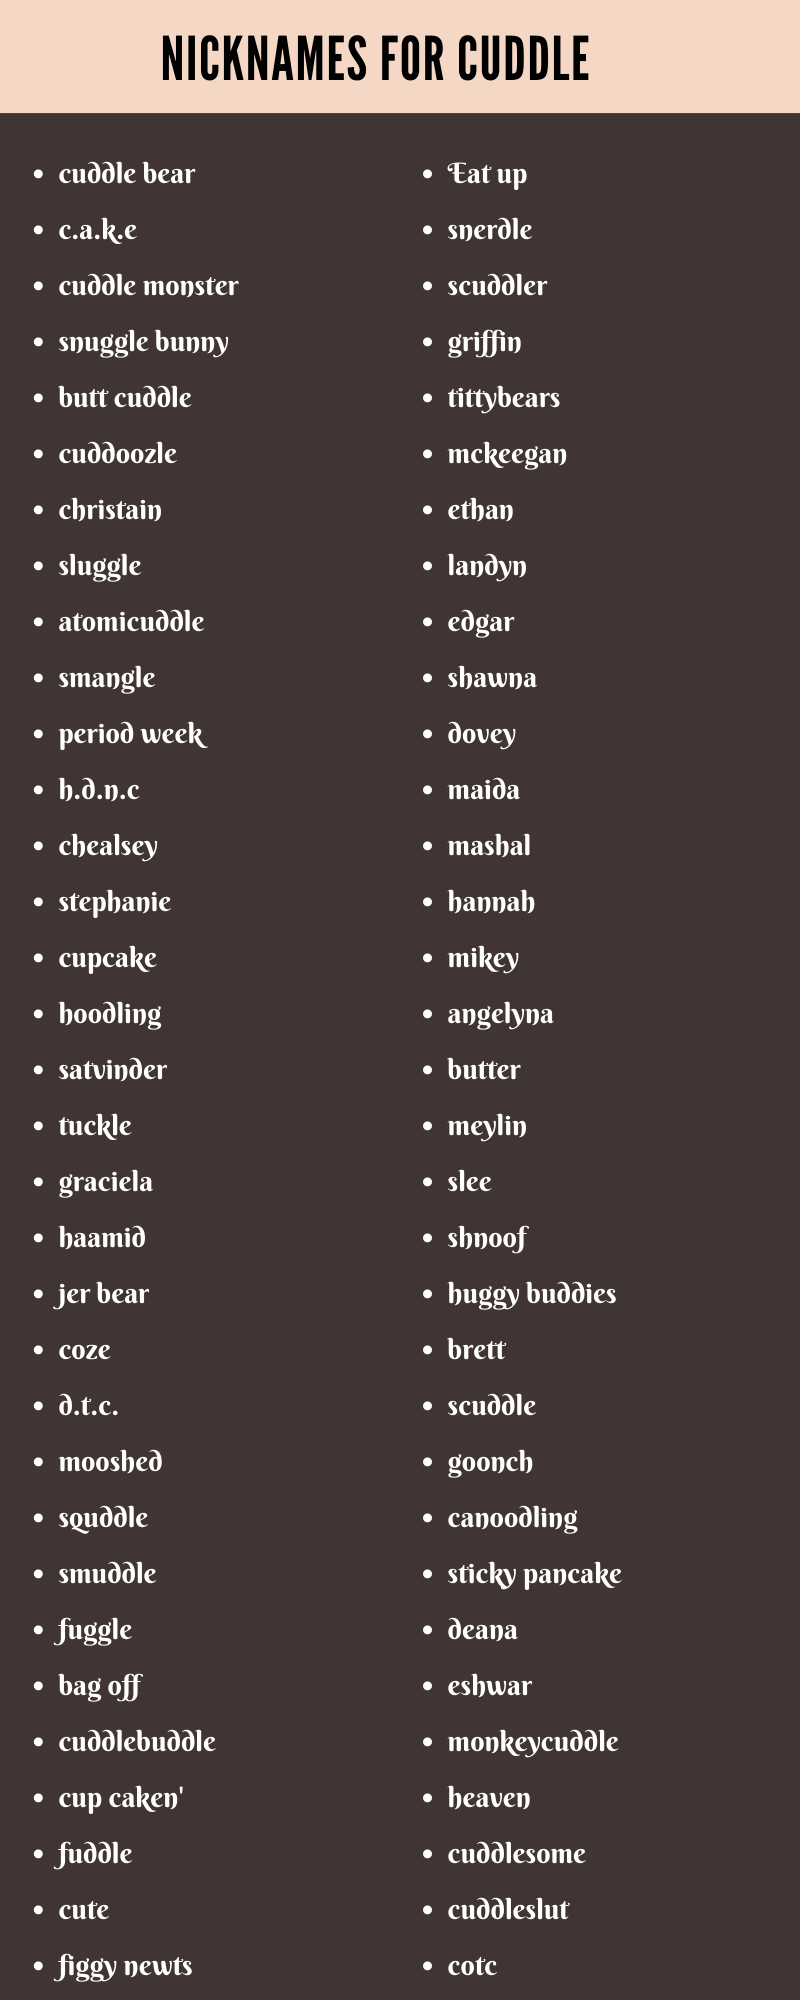 Nicknames For Cuddle